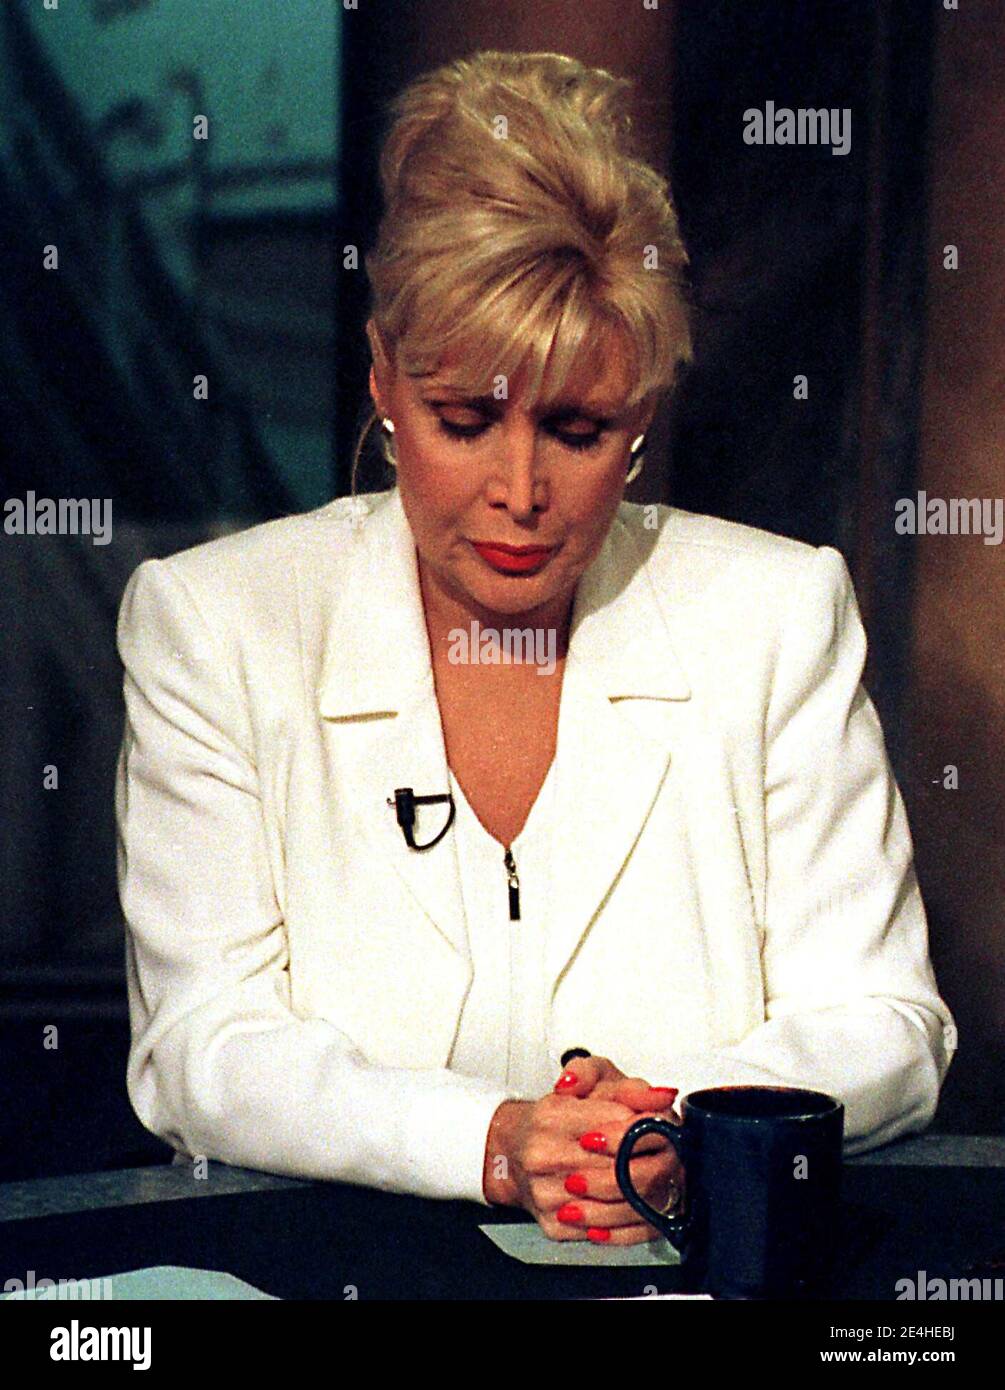 Washington, DC - June 15,1998 -- Gennifer Flowers is interviewed on the CNBC program 'Hardball with Chris Matthews'. (RESTRICTION: NO New York or New Jersey Newspapers or newspapers within a 75 mile radius of New York City) Photo by Ron Sachs/CNP/ABACAPRESS.COM Stock Photo